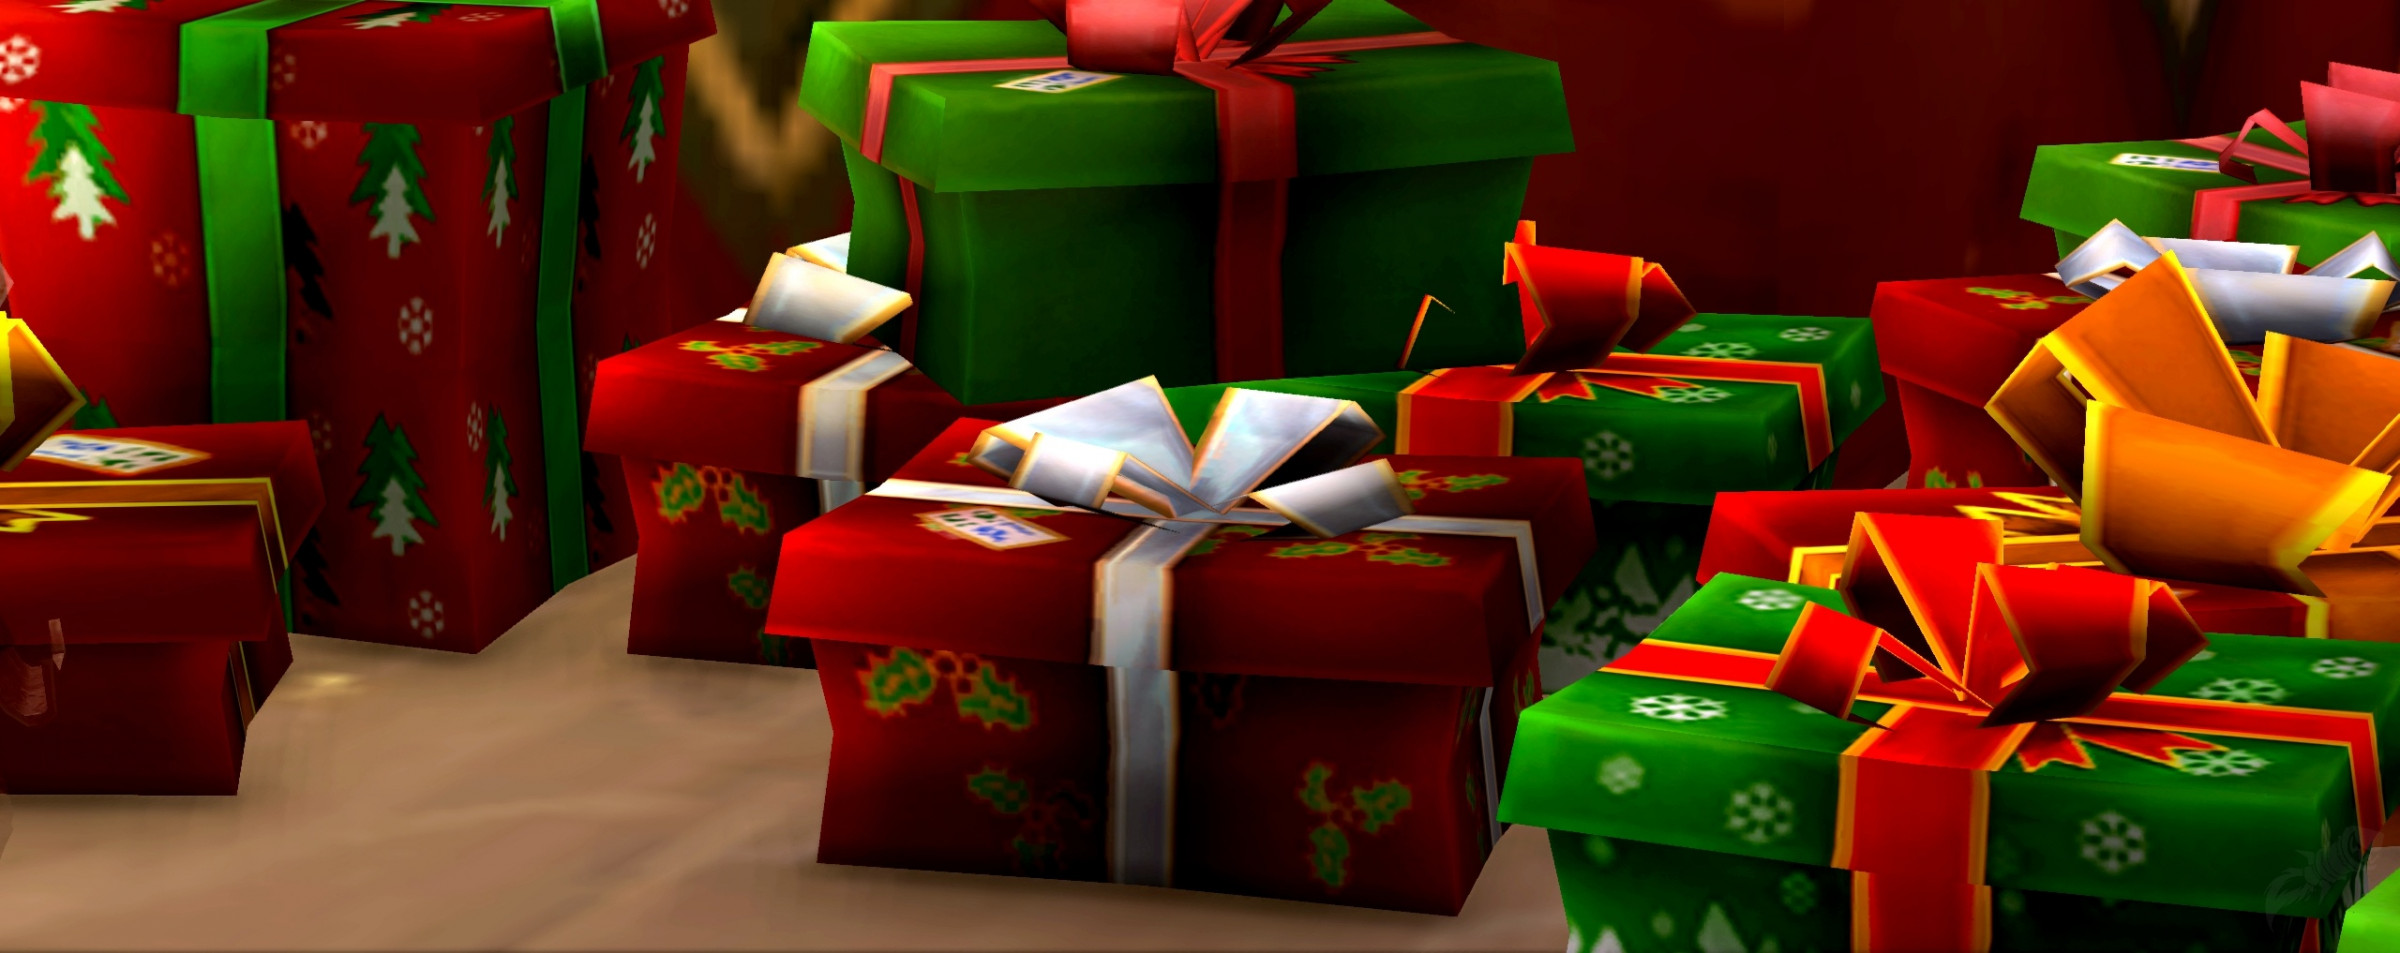 Fall Guys Gift Grab Event - Play Now!